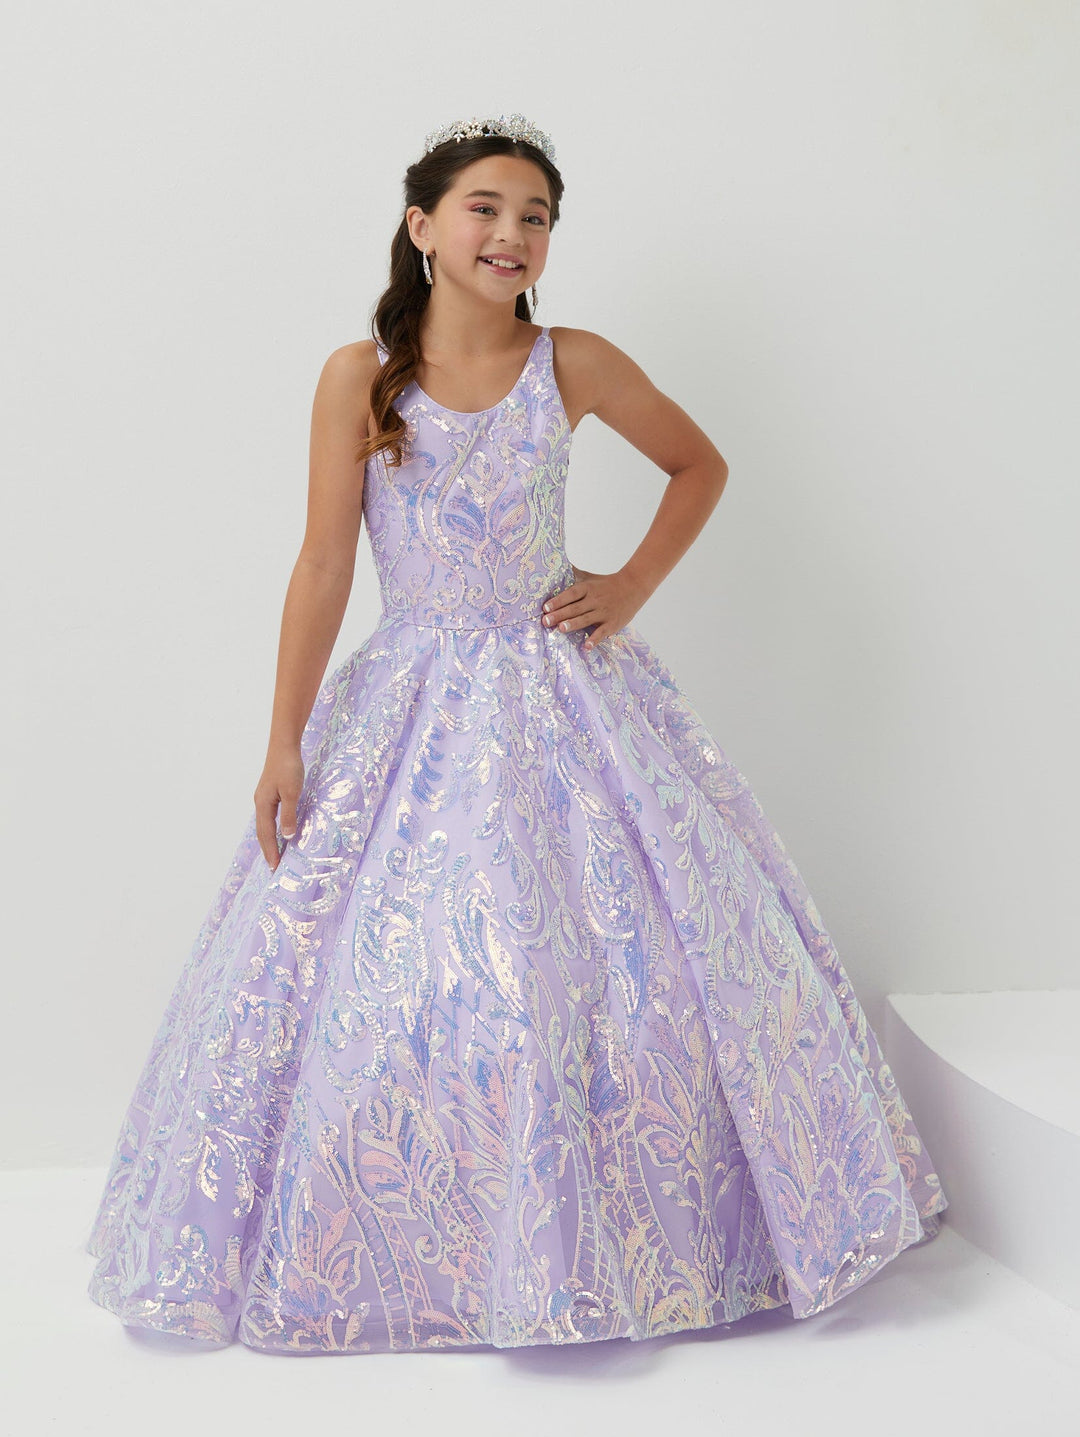 Girls Sequin Print Sleeveless Gown by Tiffany Princess 13660